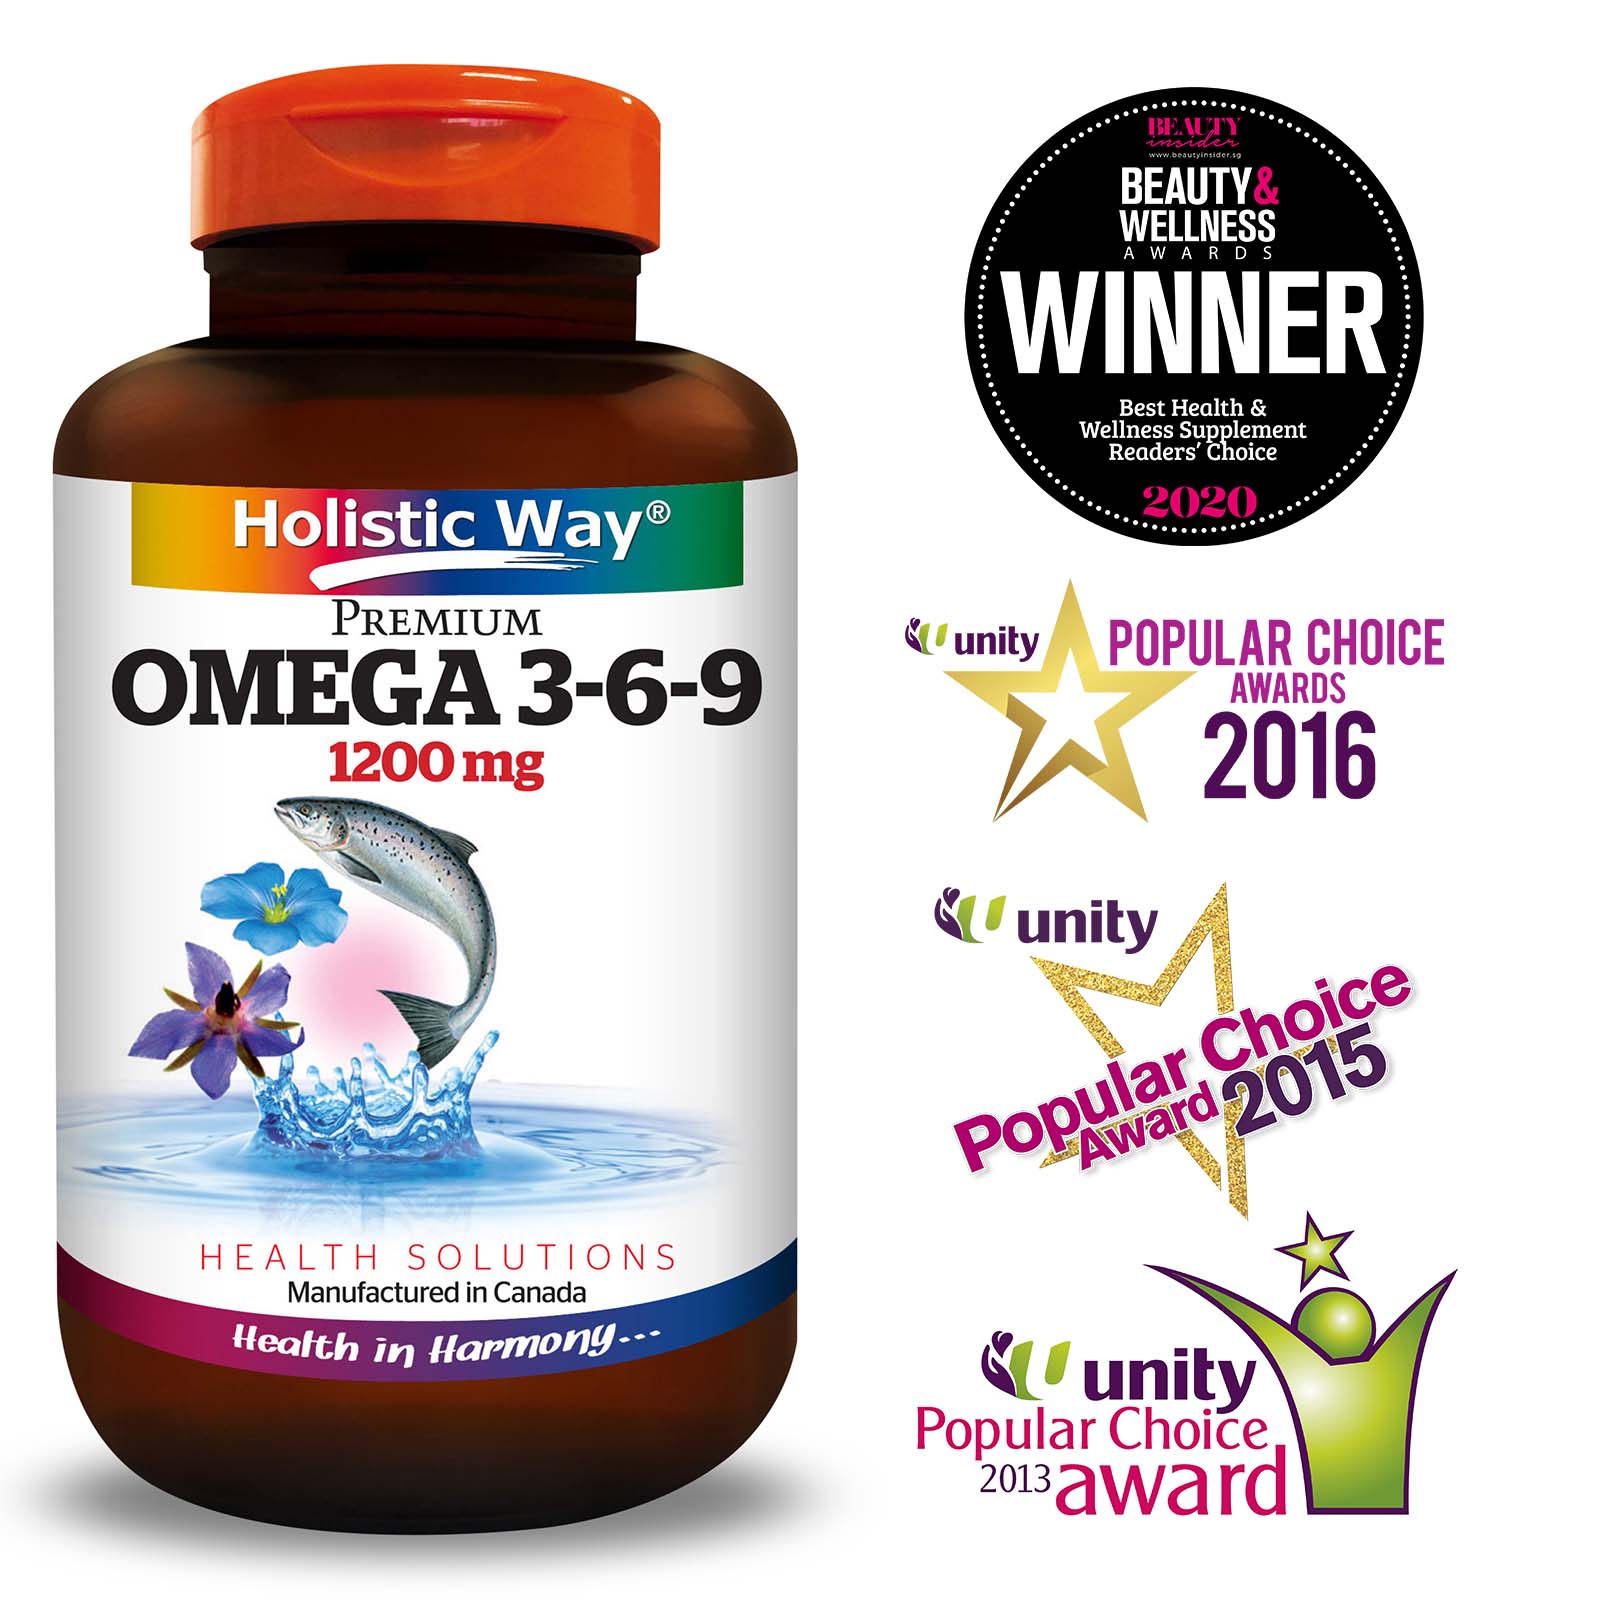 Holistic Way Omega 3-6-9 1200mg (100 Softgels) Review & Price 2020 |  Insider Mall Singapore